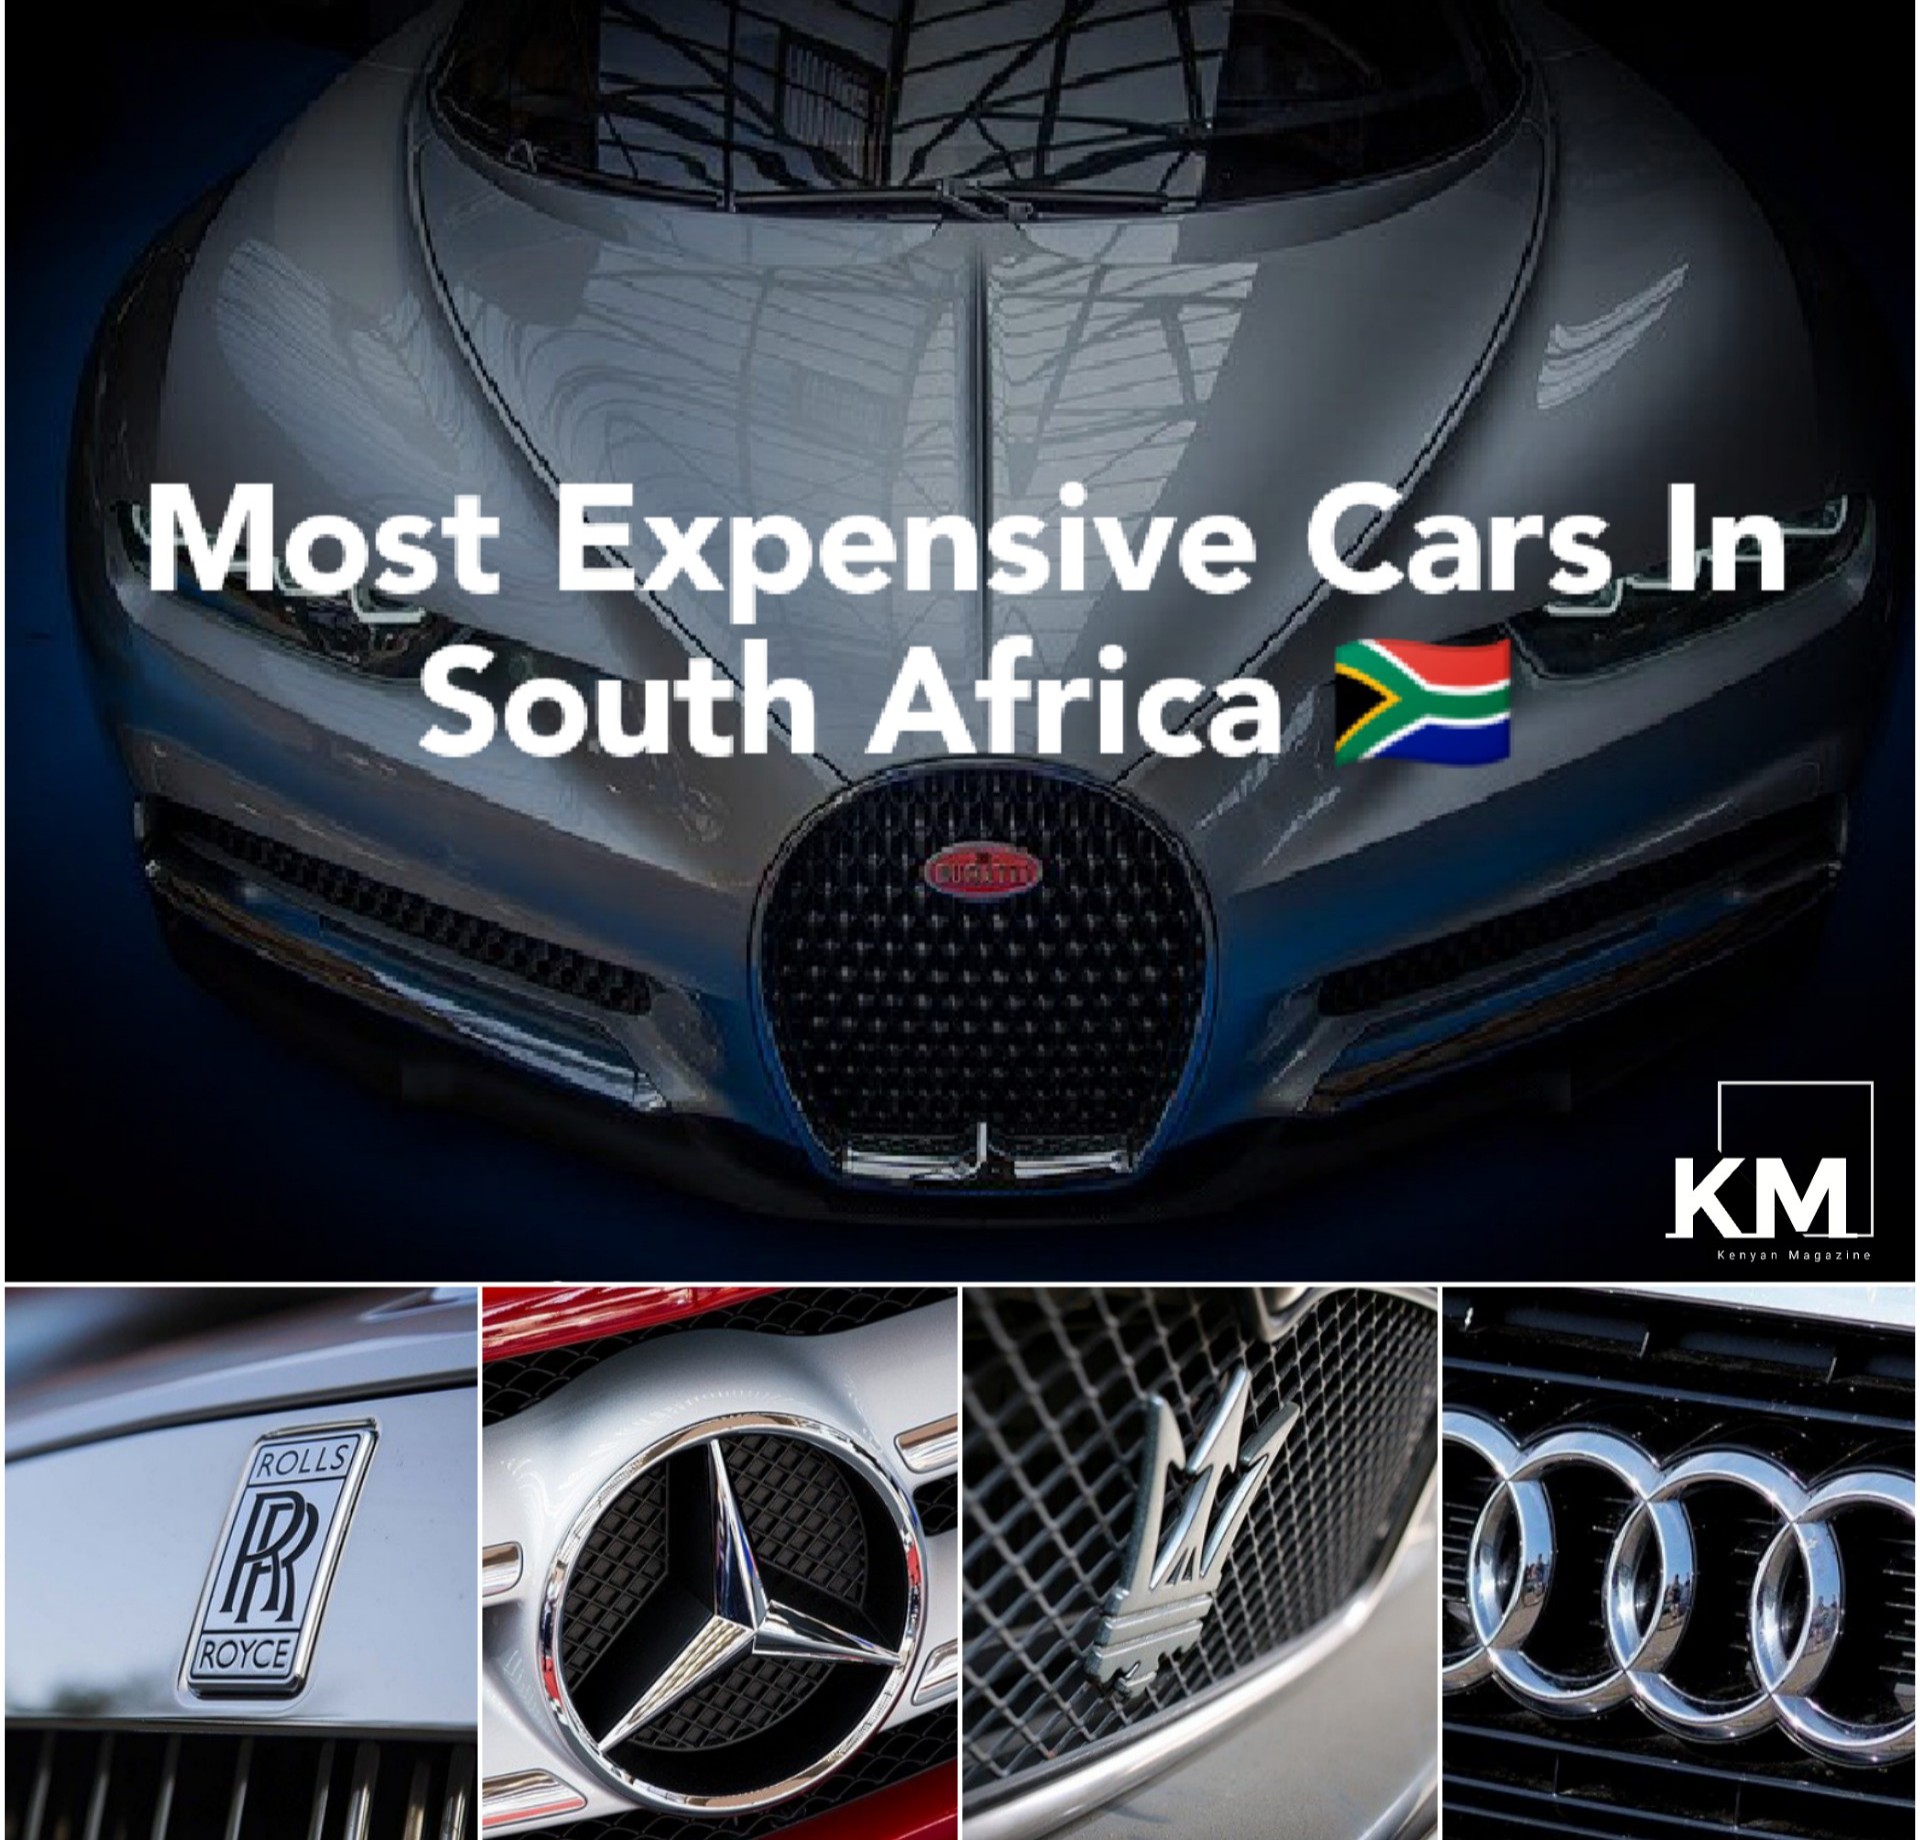 Expensive Cars In South Africa